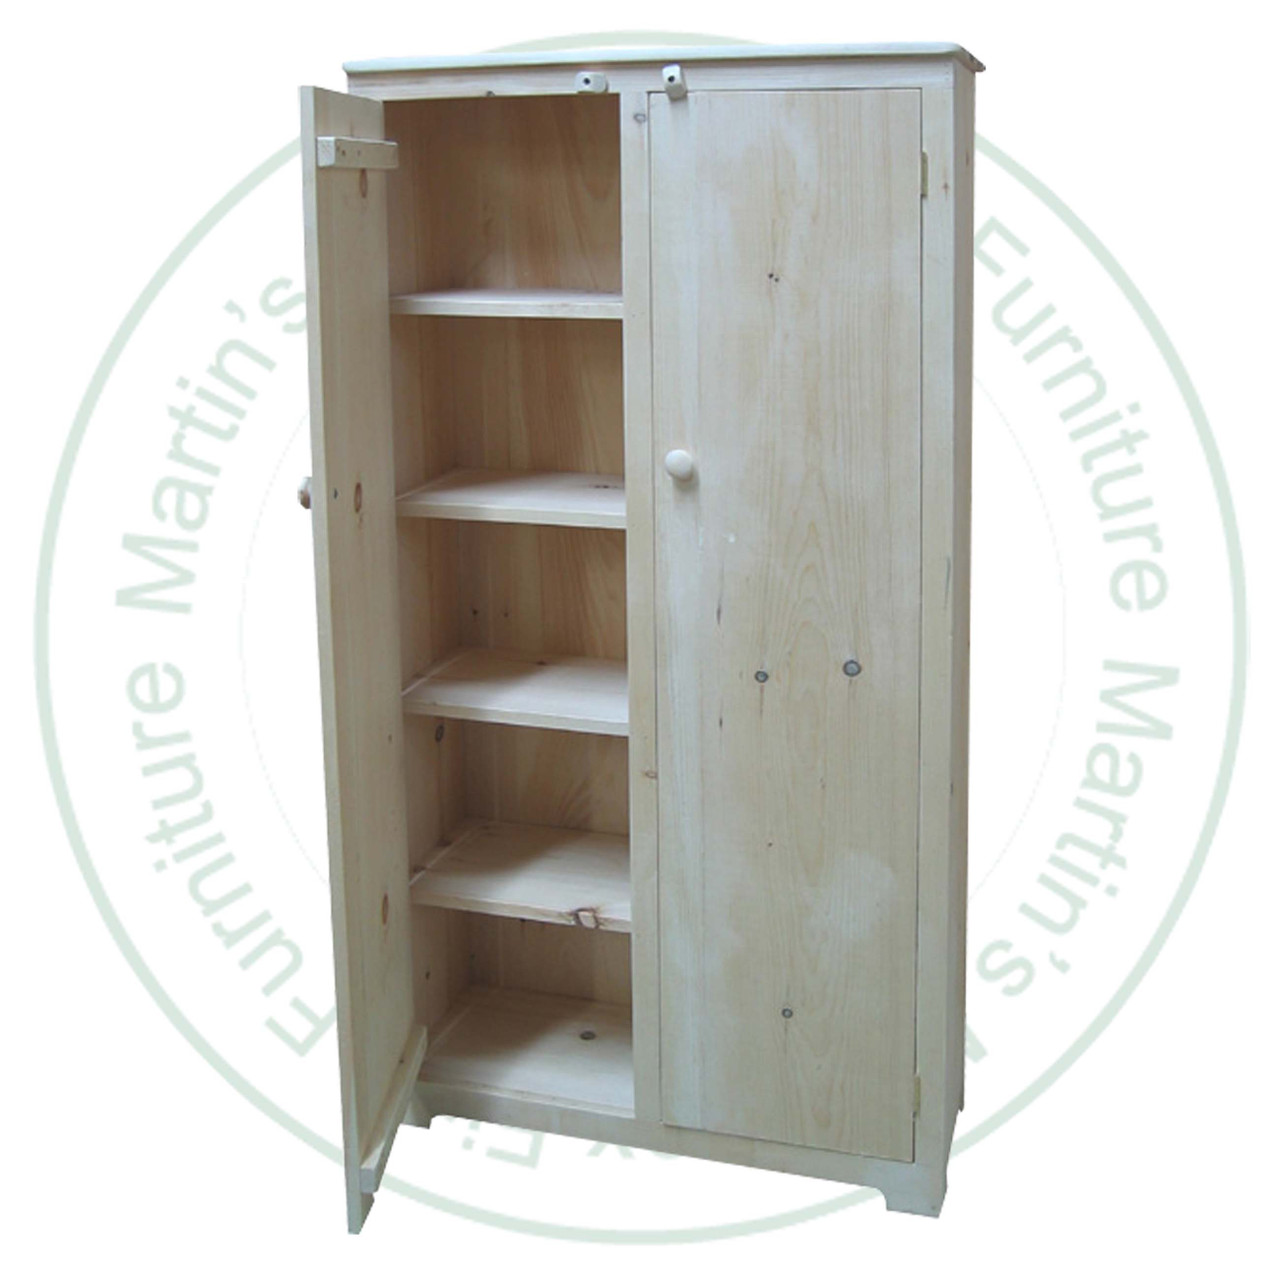 Maple Nith River Jam Cupboard 12''D x 22''W x 60''H With 2 Doors